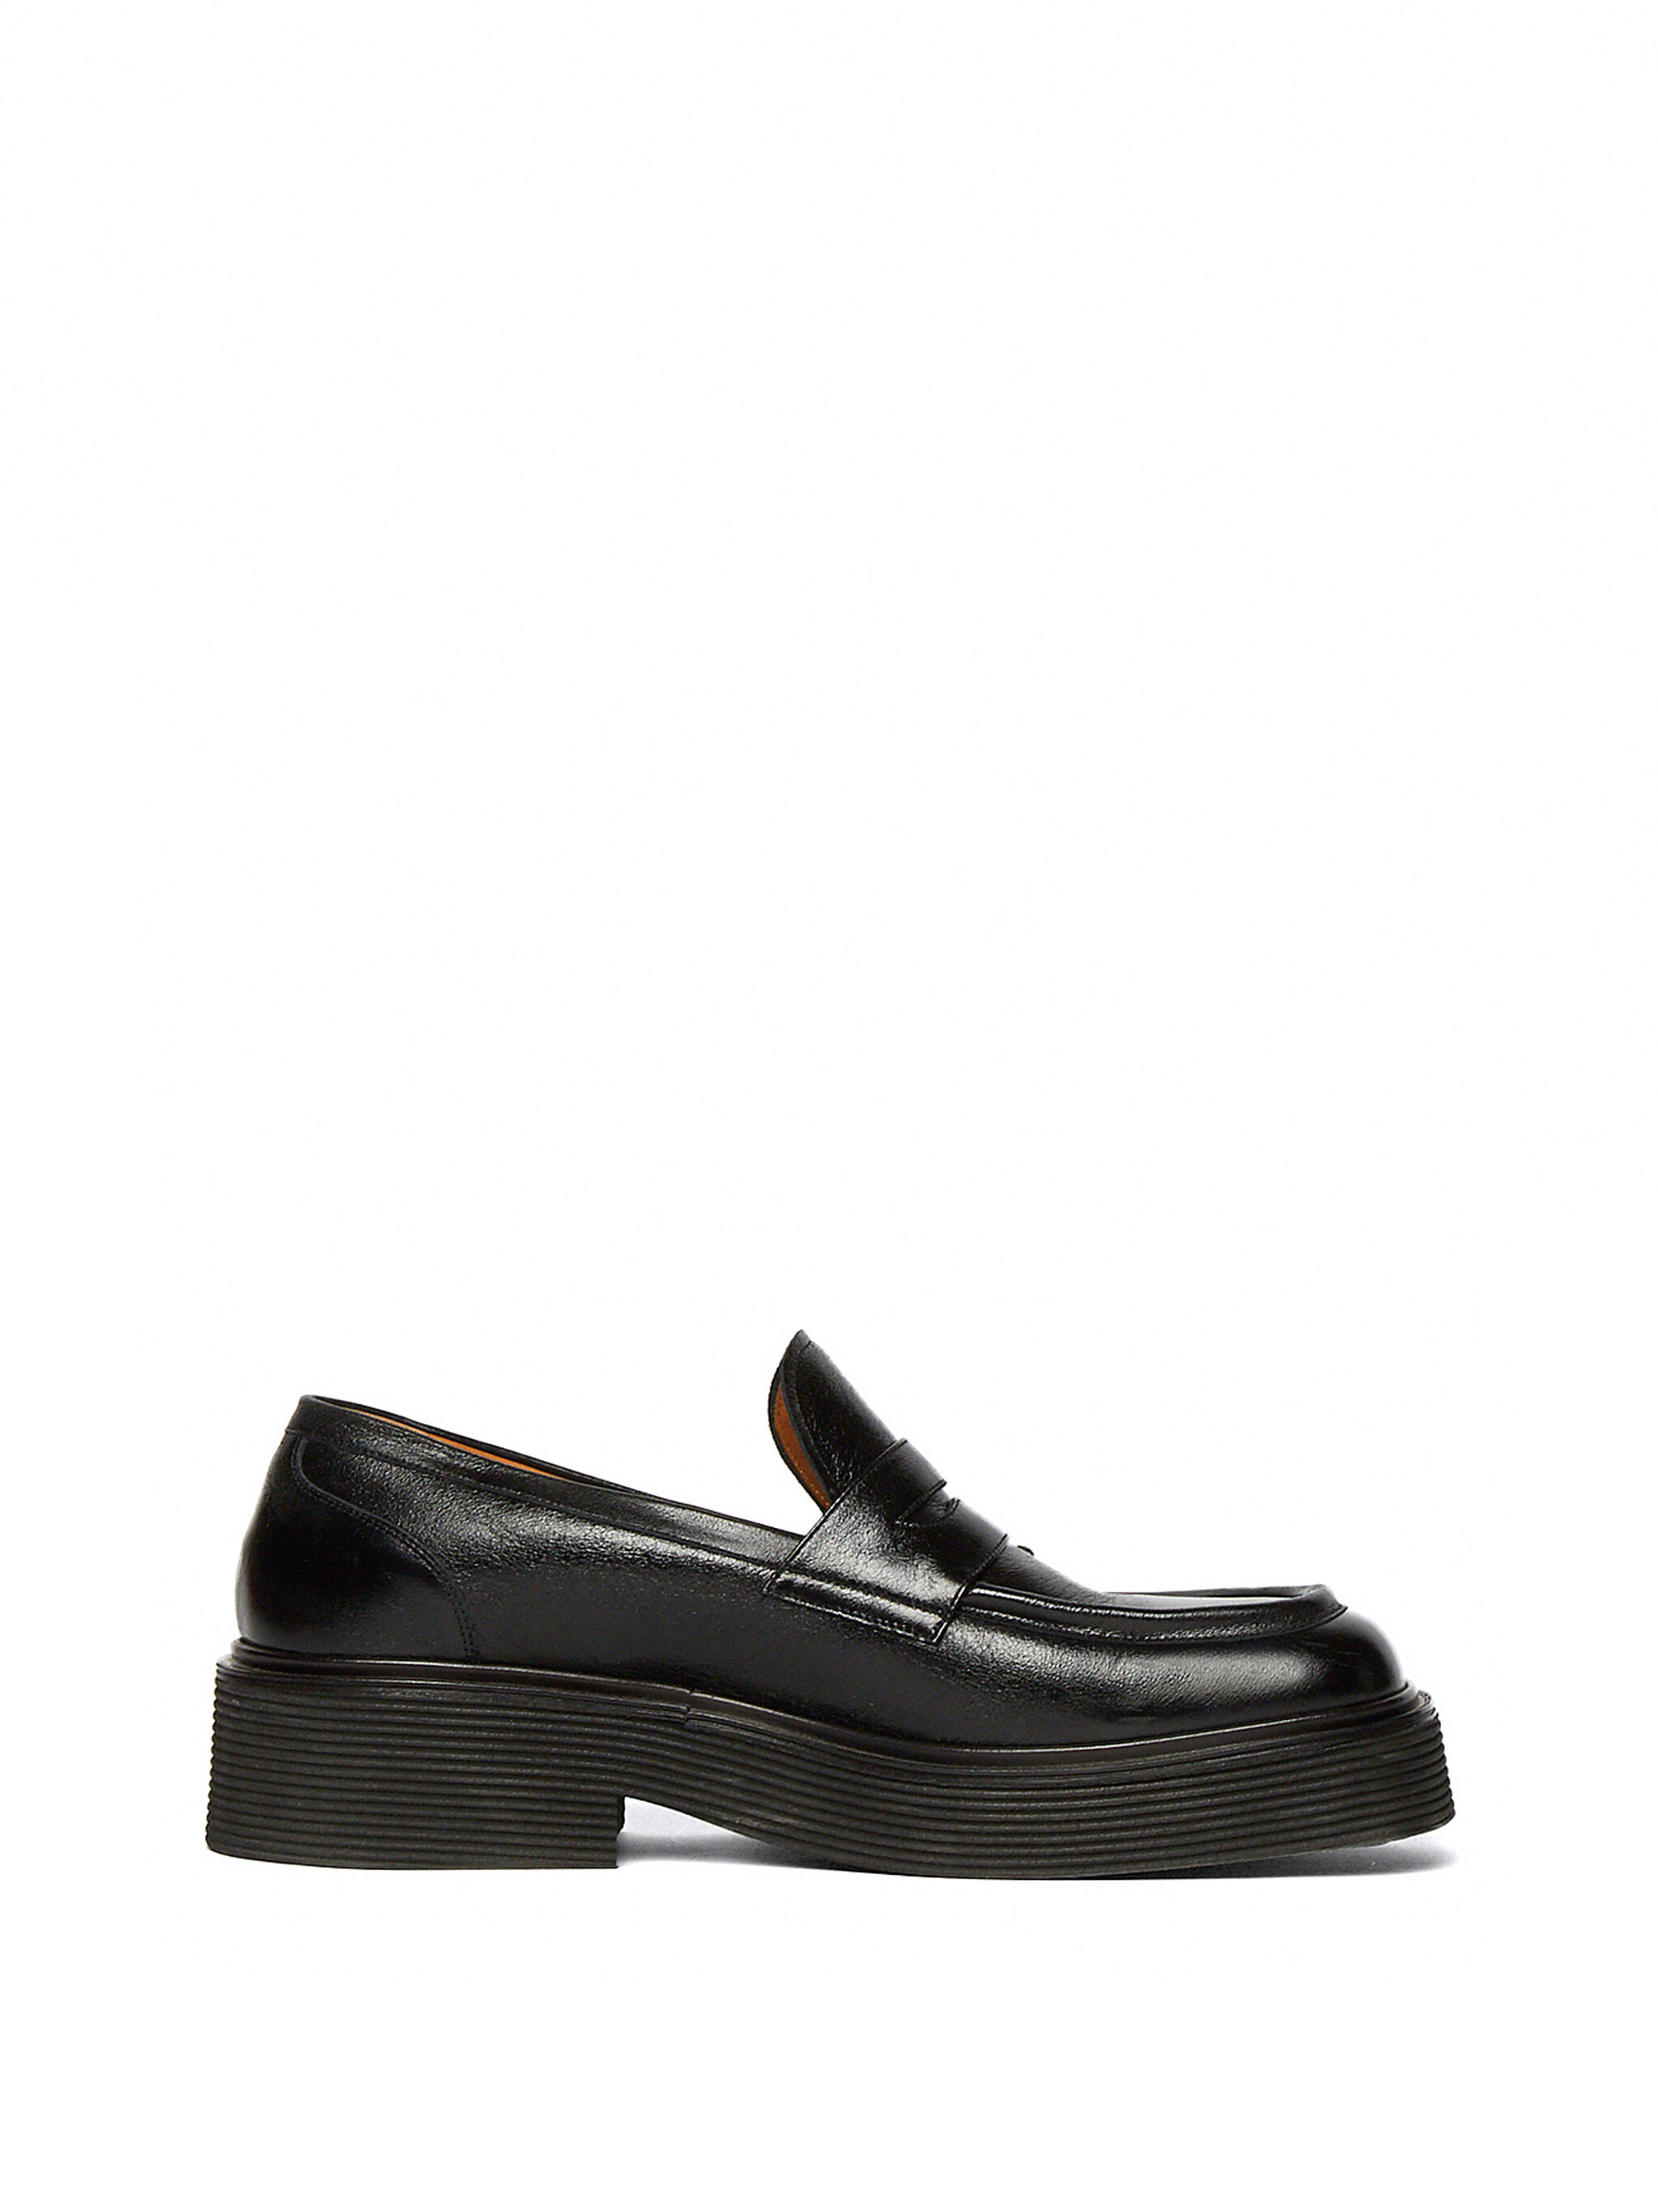 Marni Pierced Penny Loafers | THE FLAMEL®